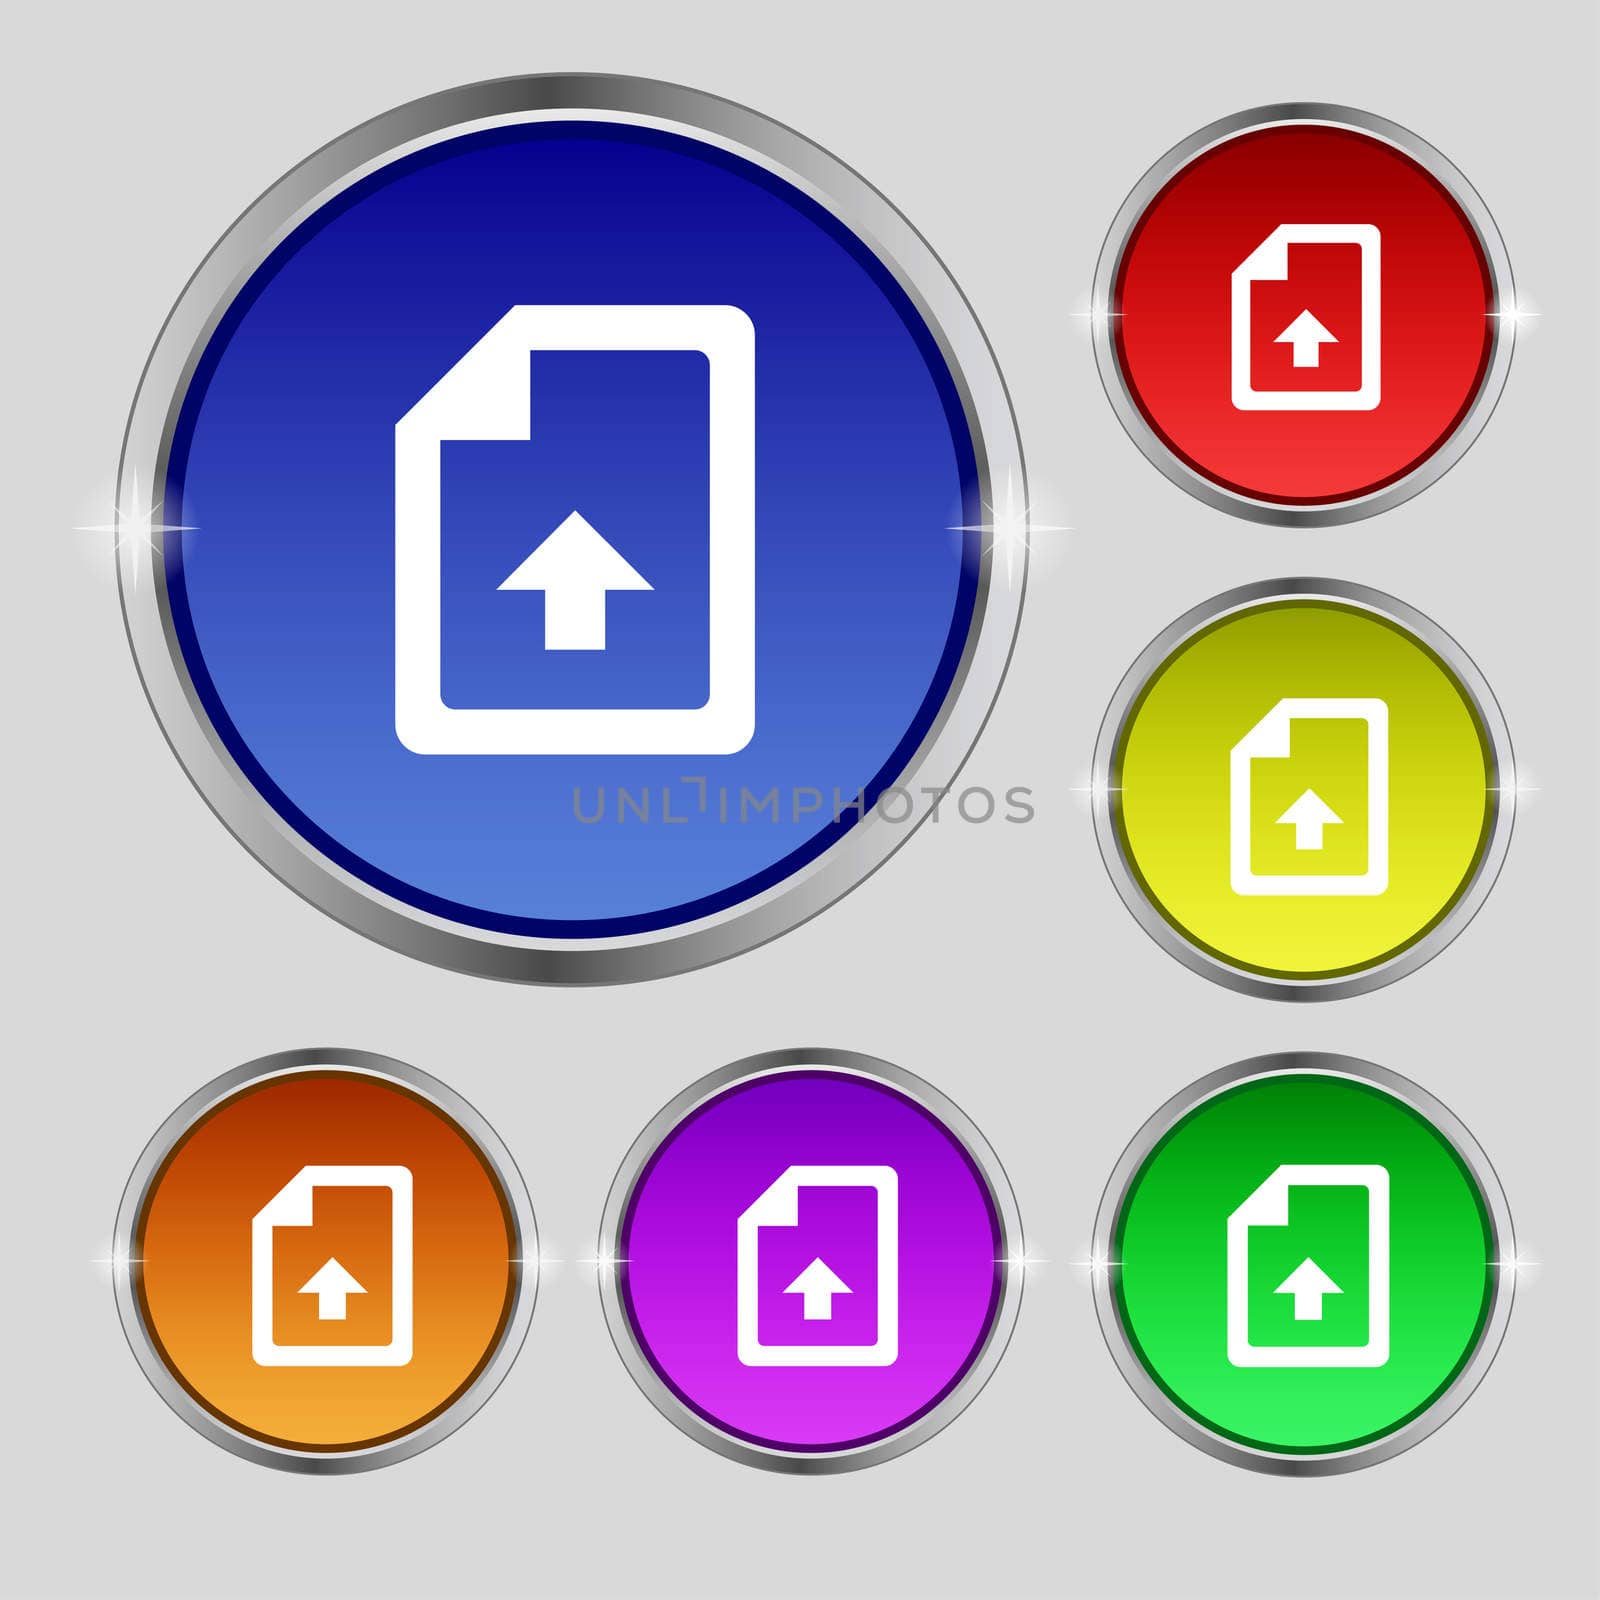 Export, Upload file icon sign. Round symbol on bright colourful buttons. illustration